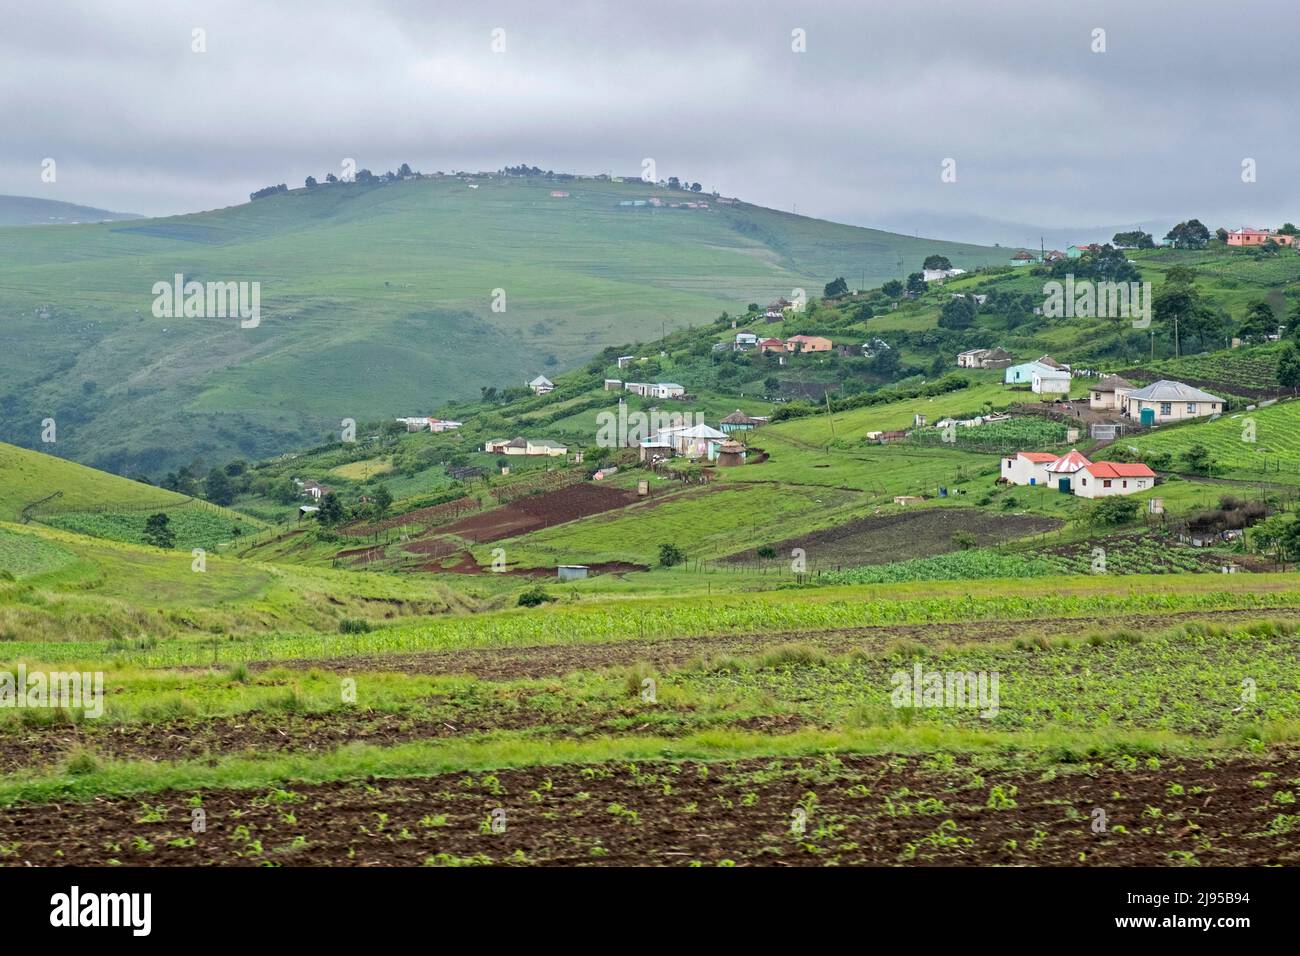 Rural settlement in the countryside near Port St. Johns, Southern end of the Wild Coast, O.R.Tambo, Eastern Cape Province, South Africa Stock Photo